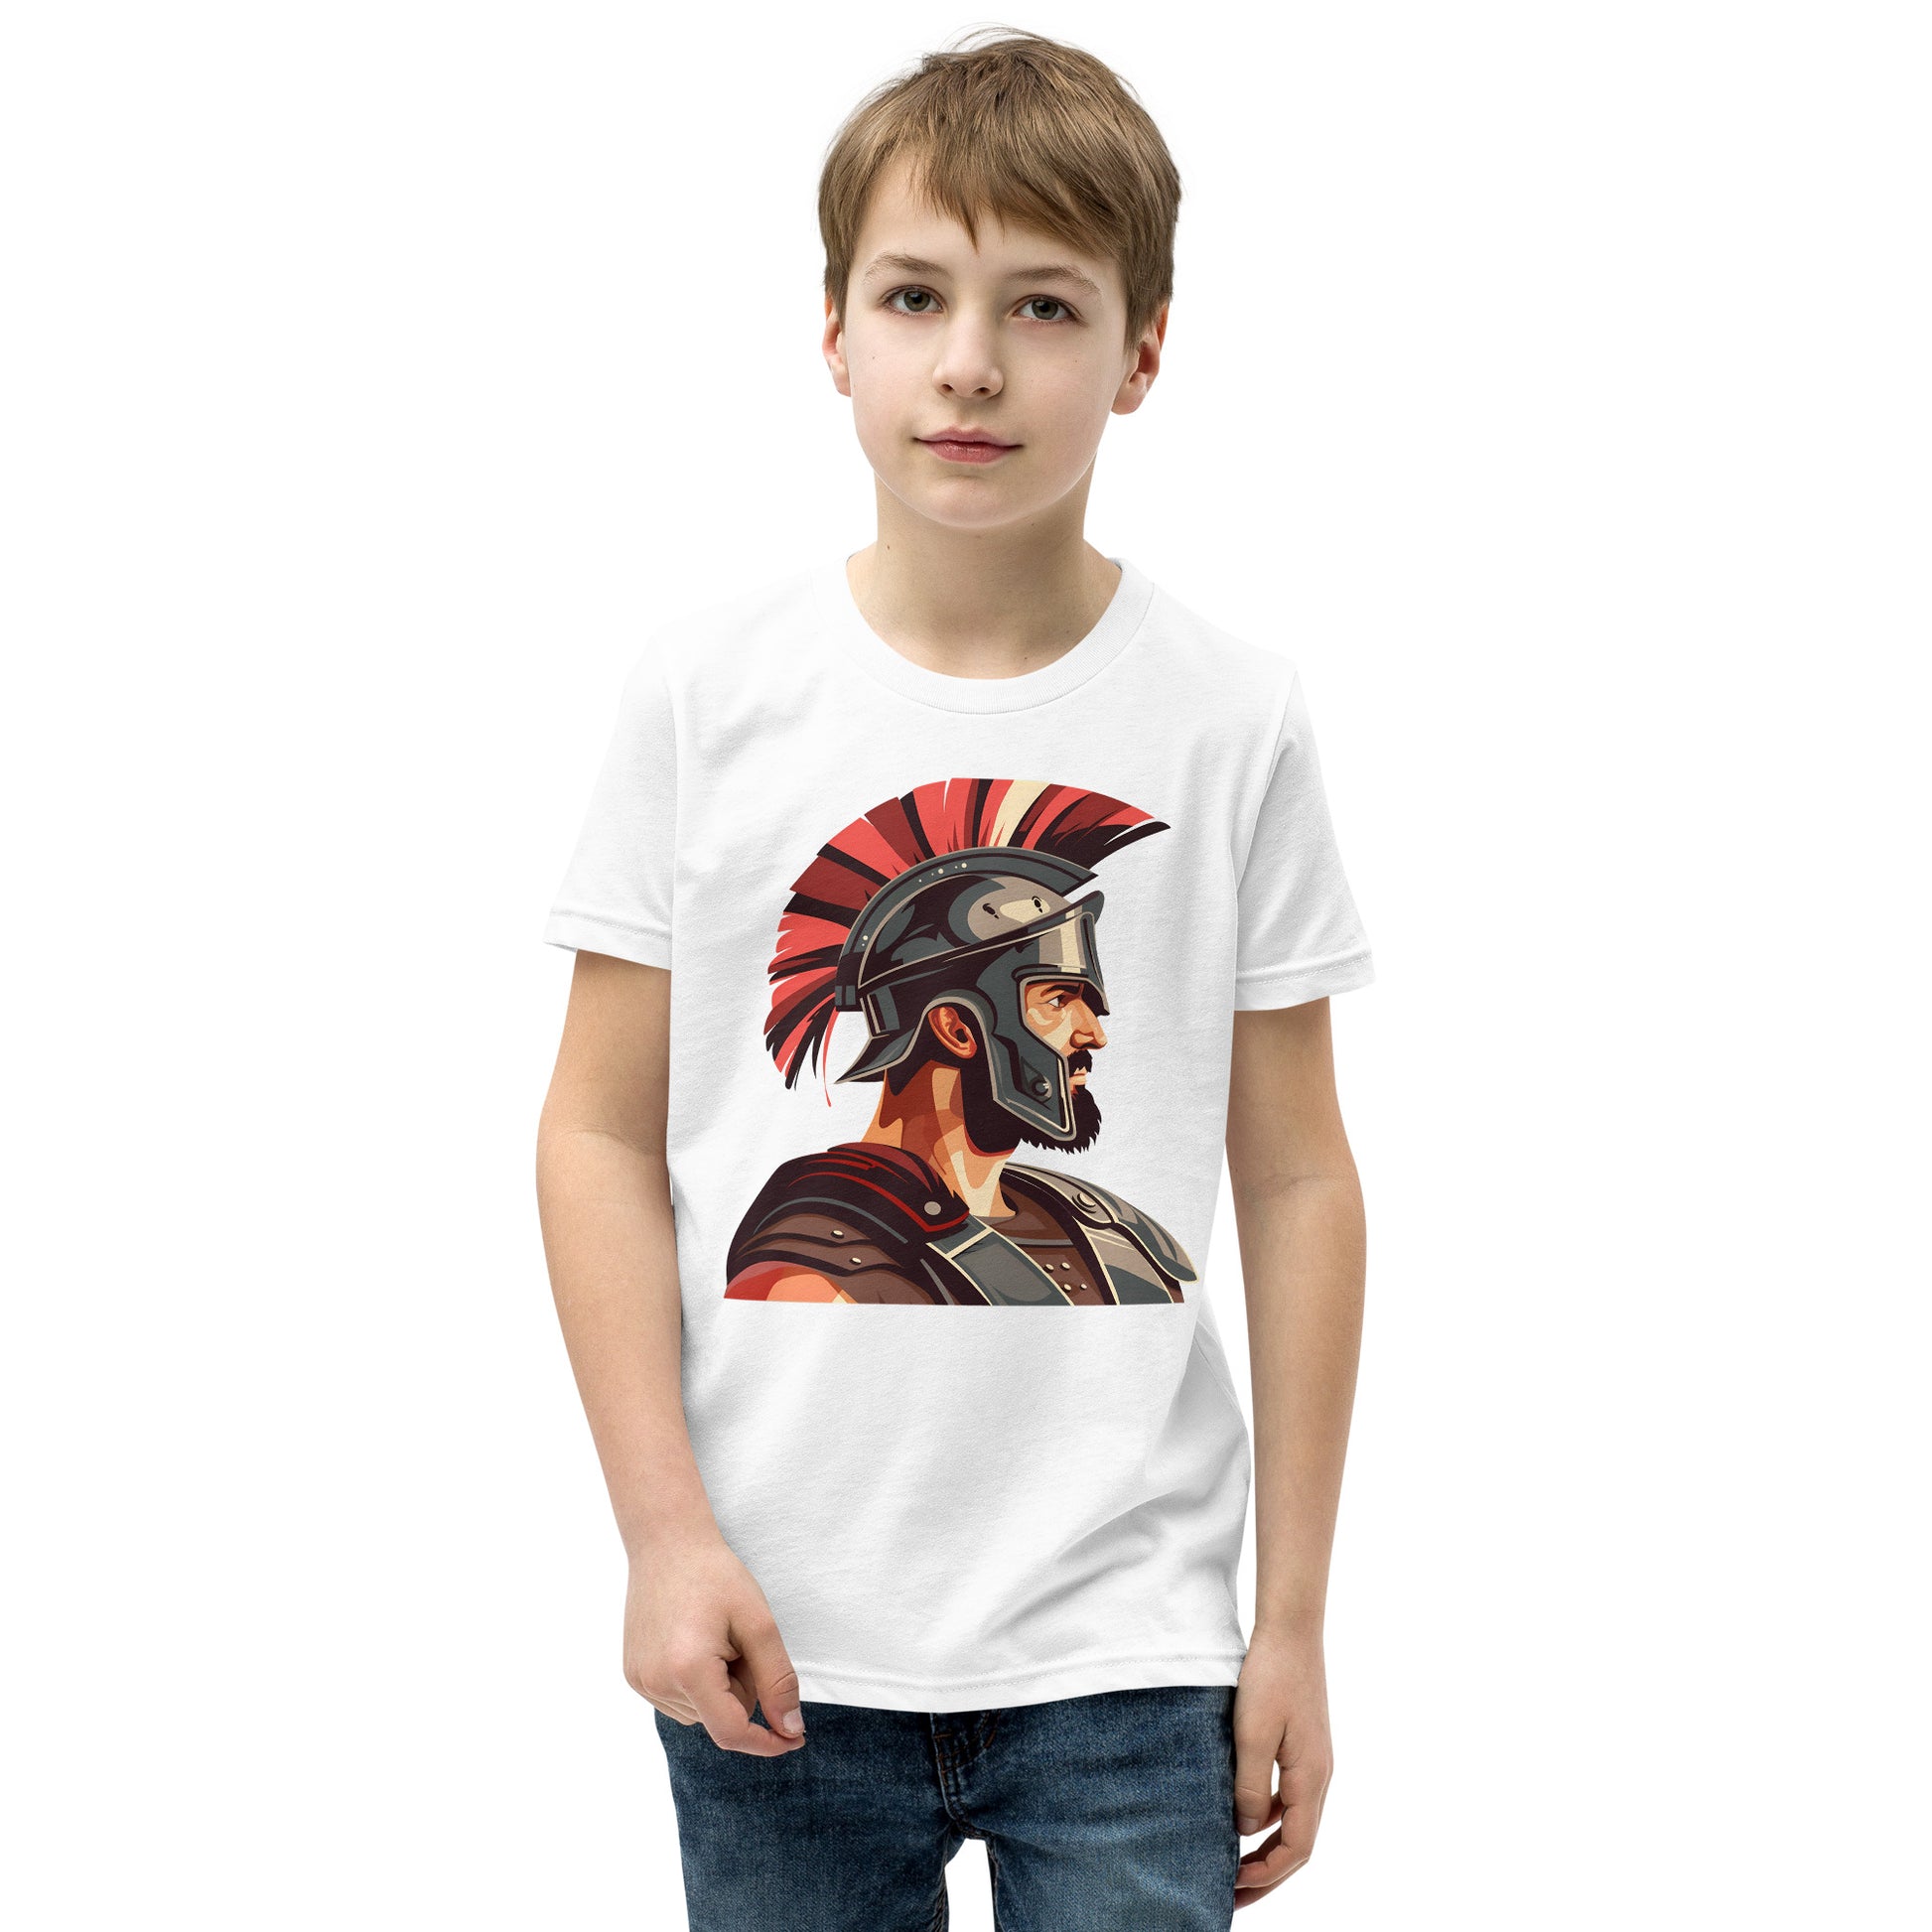 Teenager with a white T-shirt with a print of a warrior